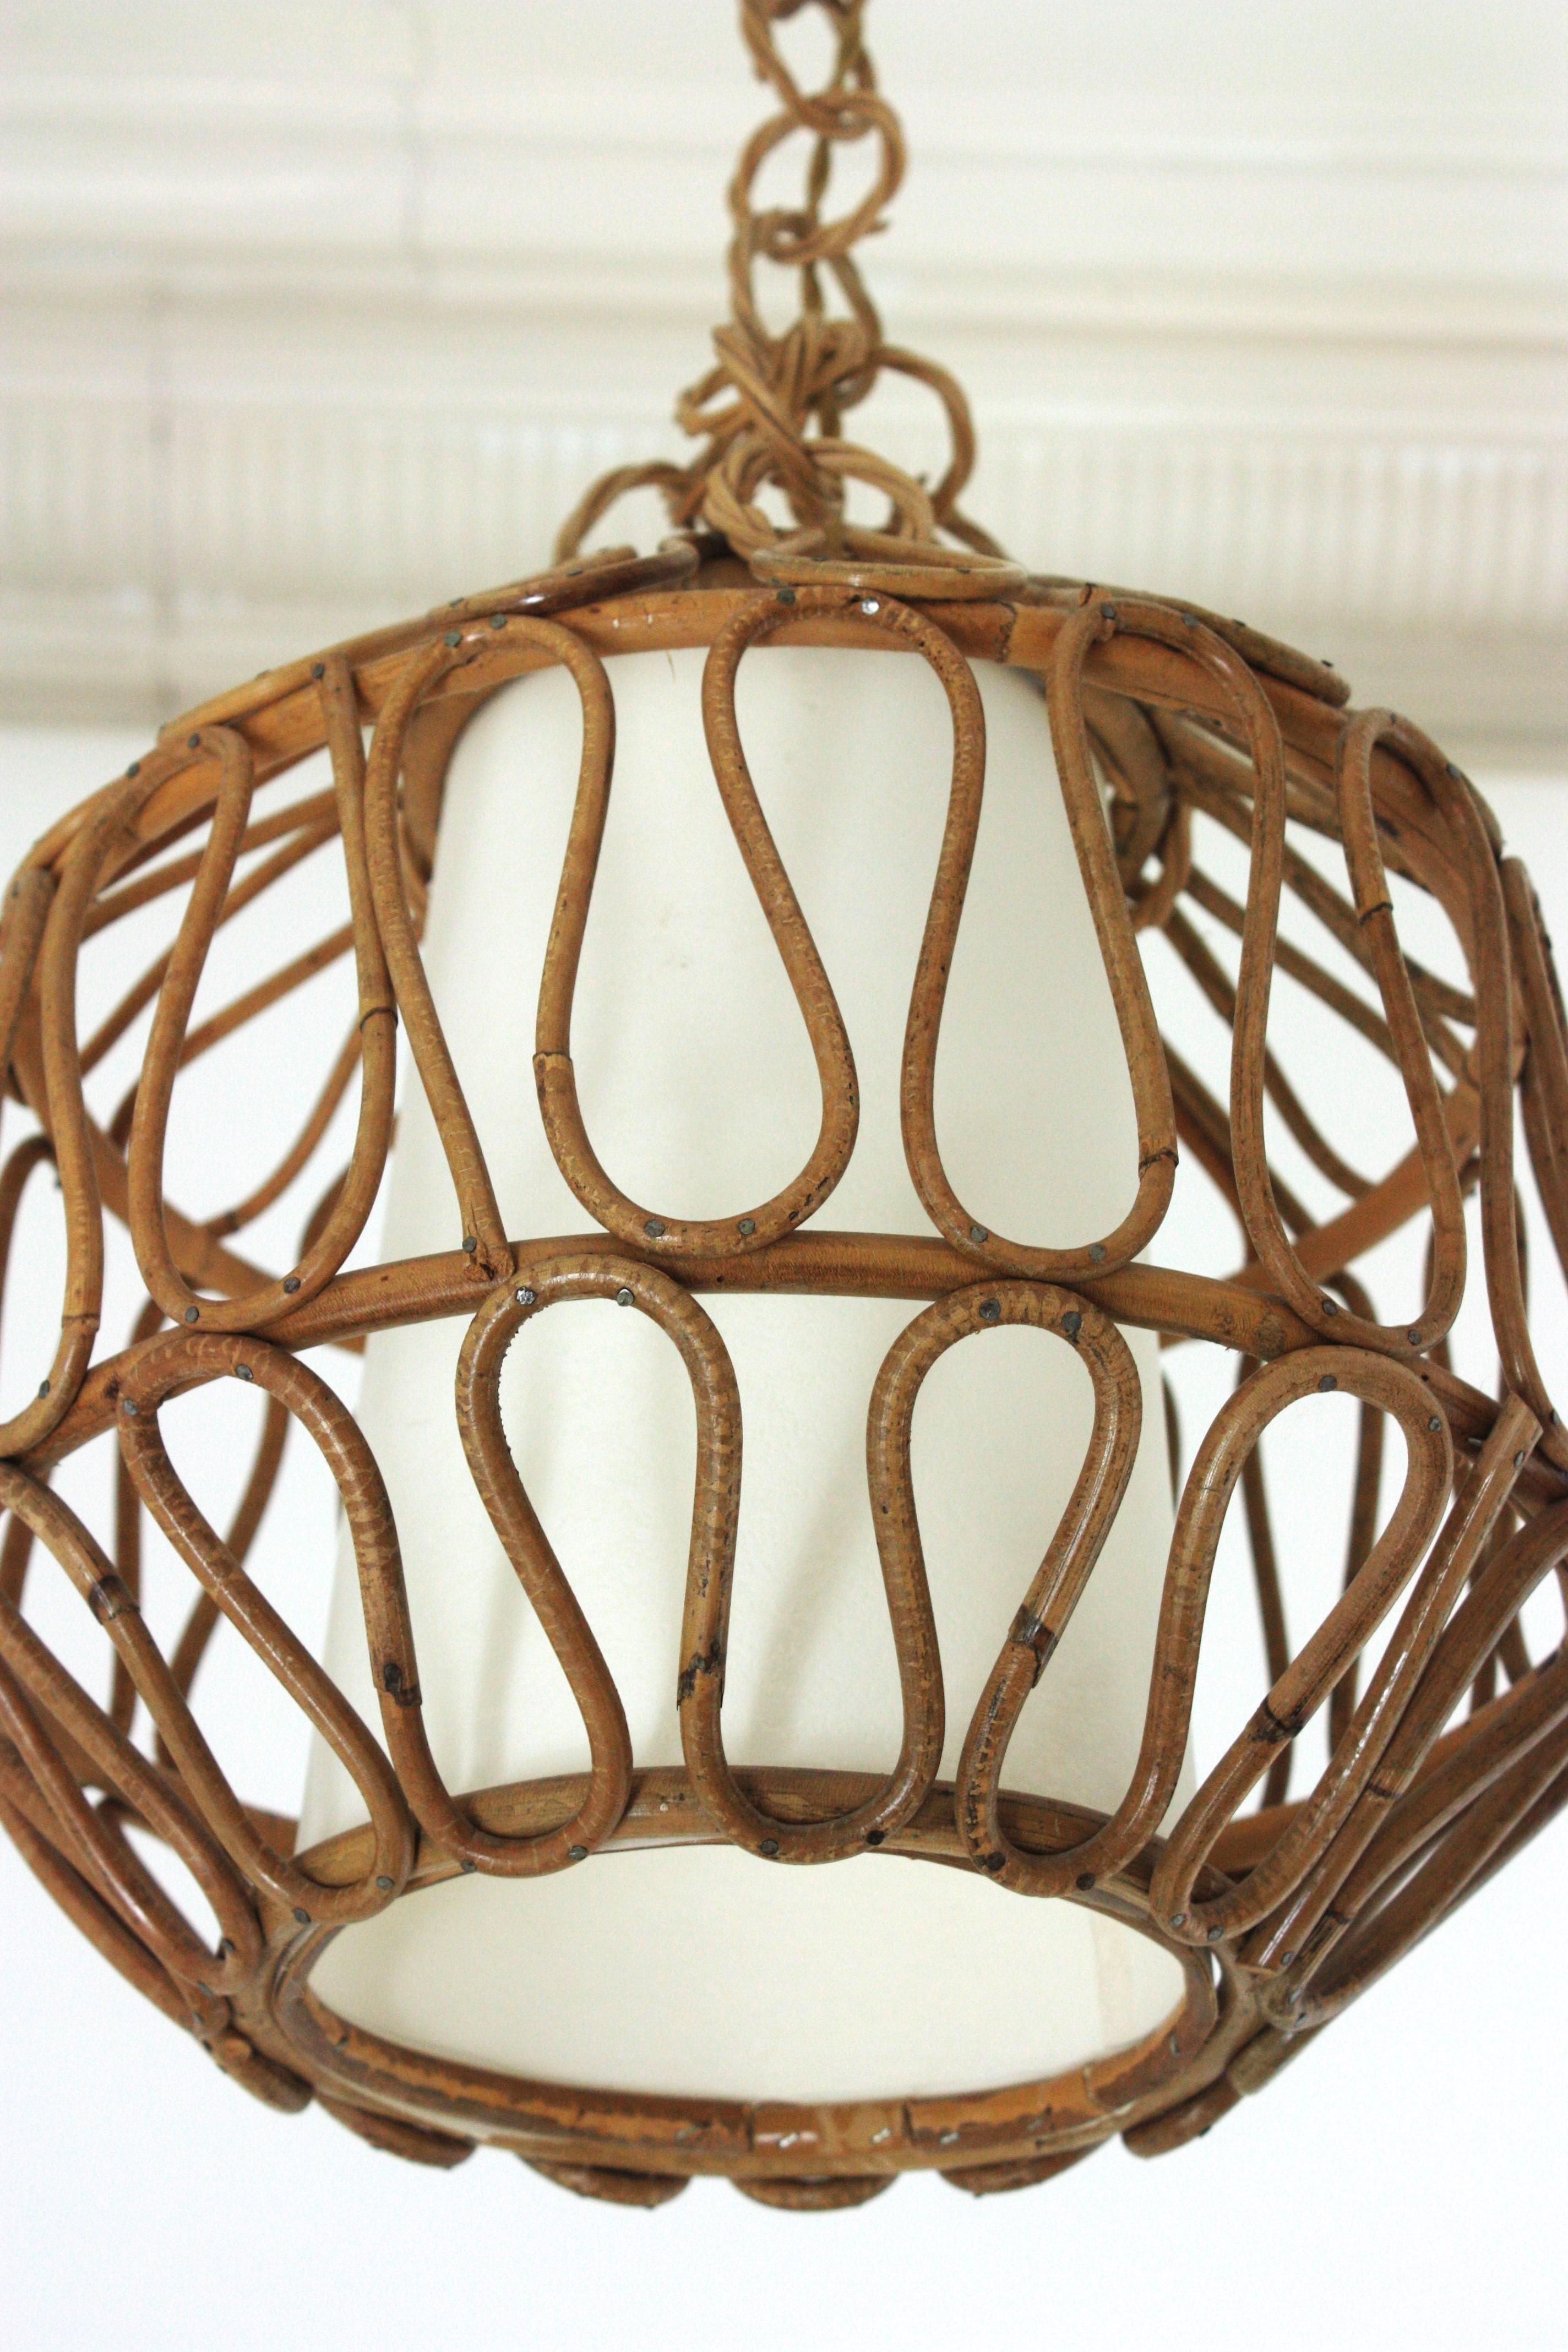 20th Century Rattan Globe Pendant Light or Lantern with Loop Details, Spain, 1960s For Sale